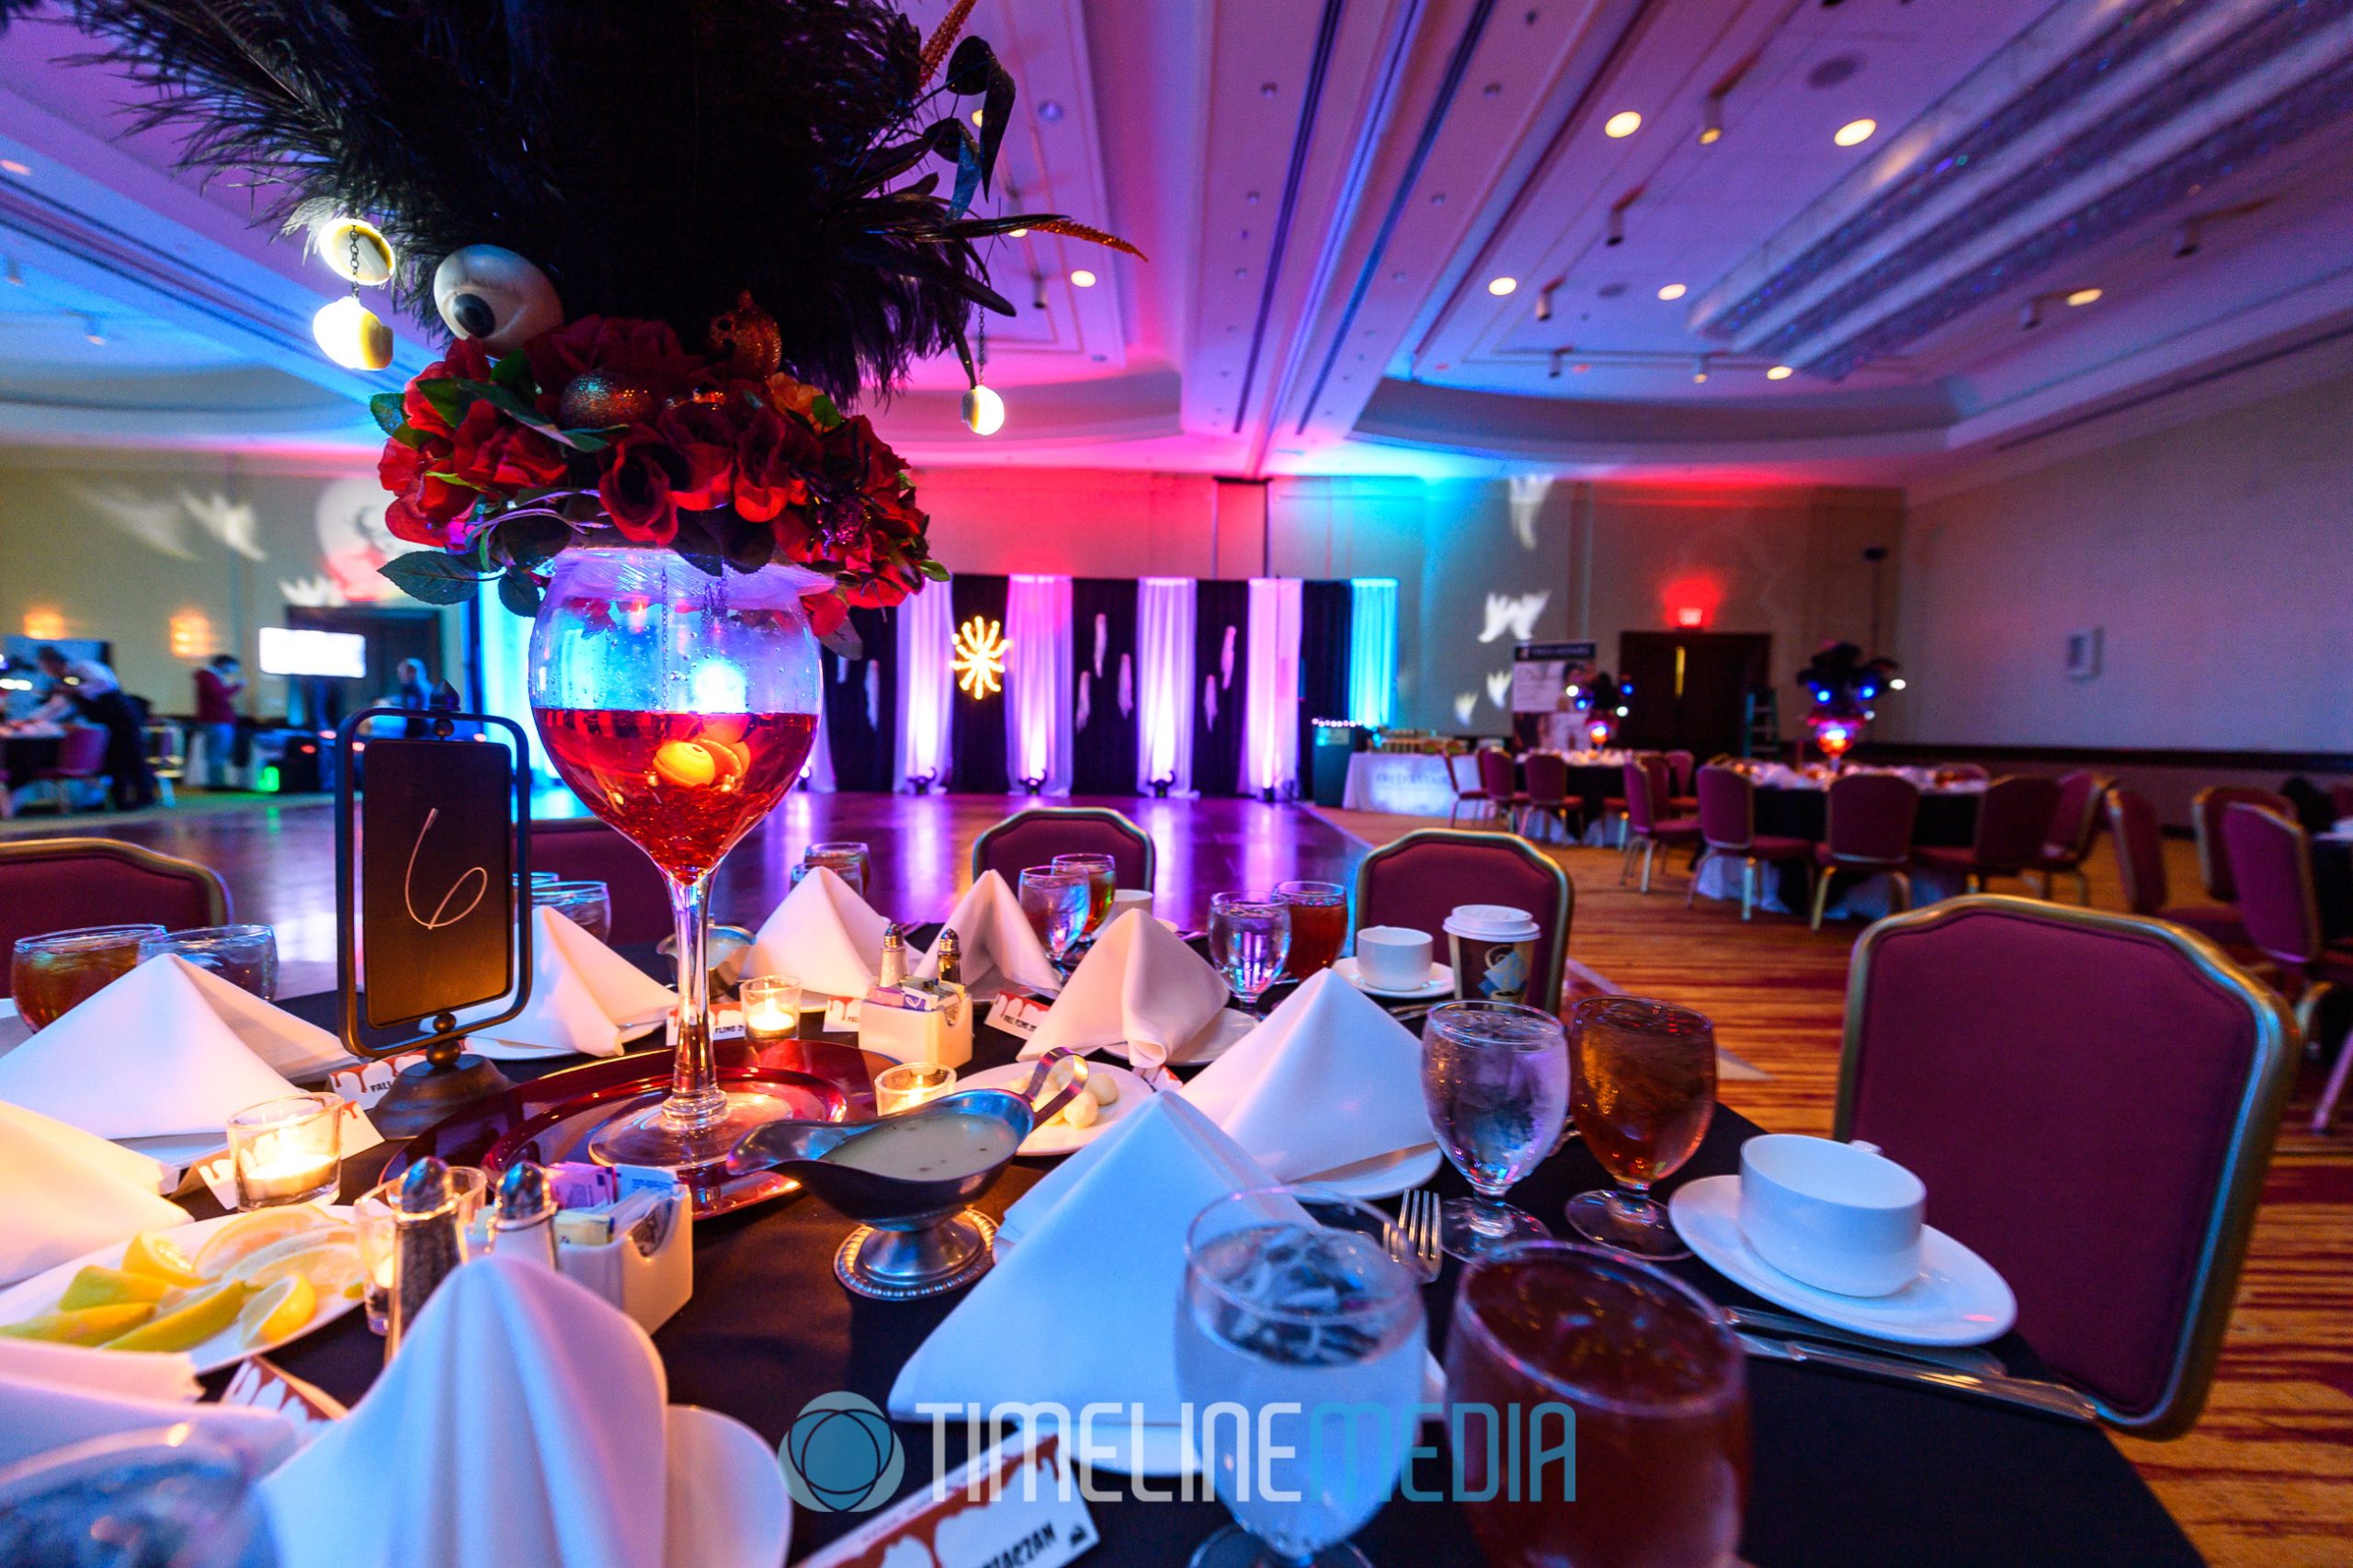 Fred Astaire Dance Studios Fall Fling event in Dulles, Virginia ©TimeLine Media